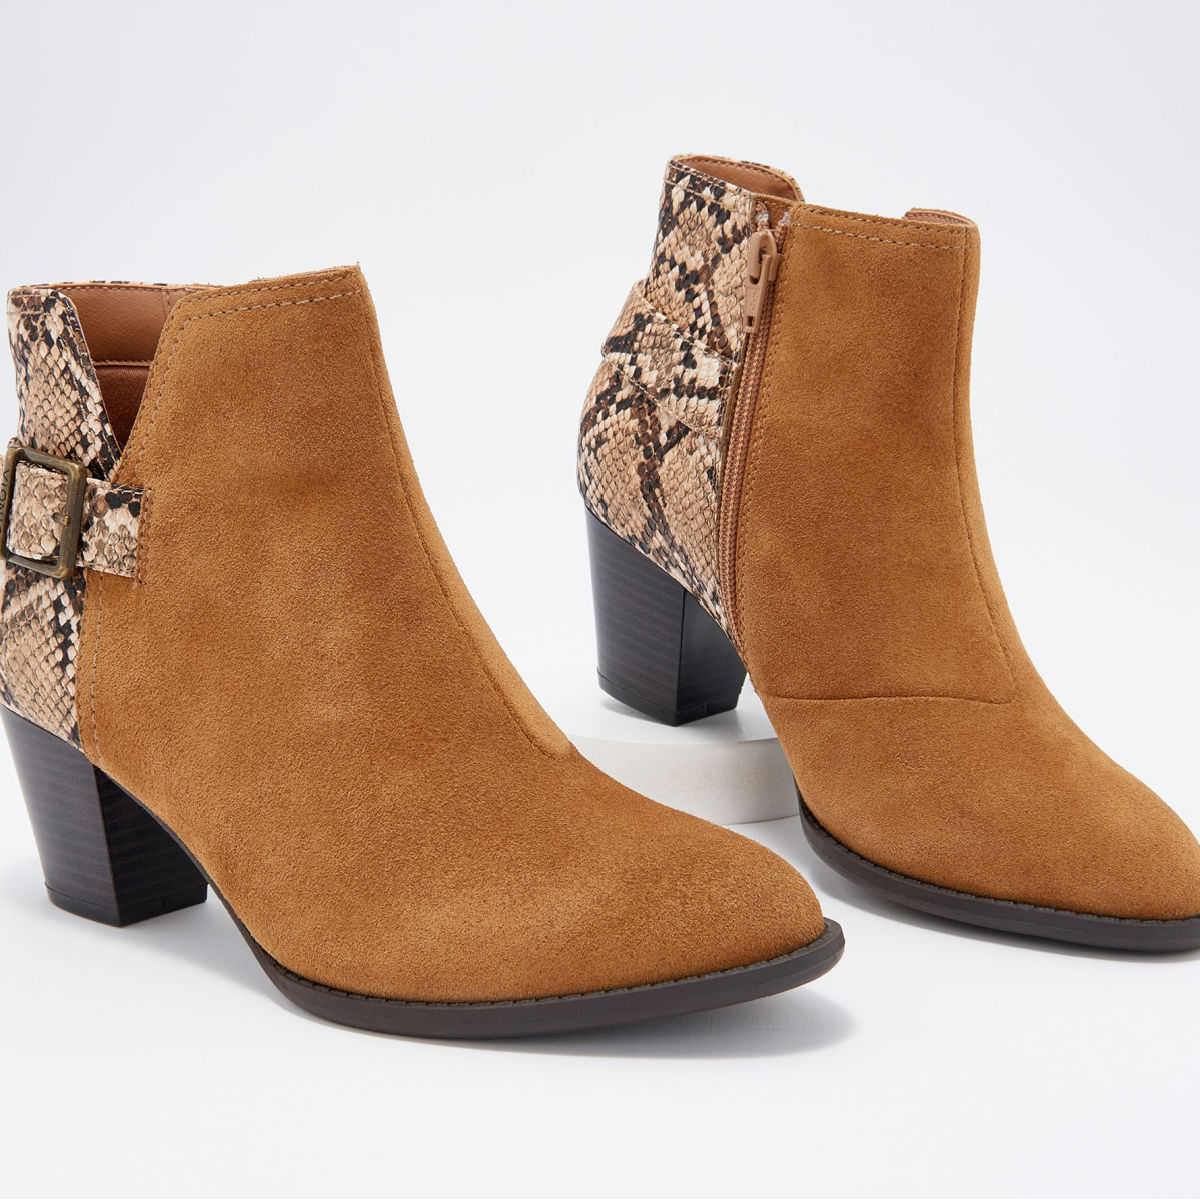 Vionic Naomi Suede Snake-Print Water-Resistant Boots